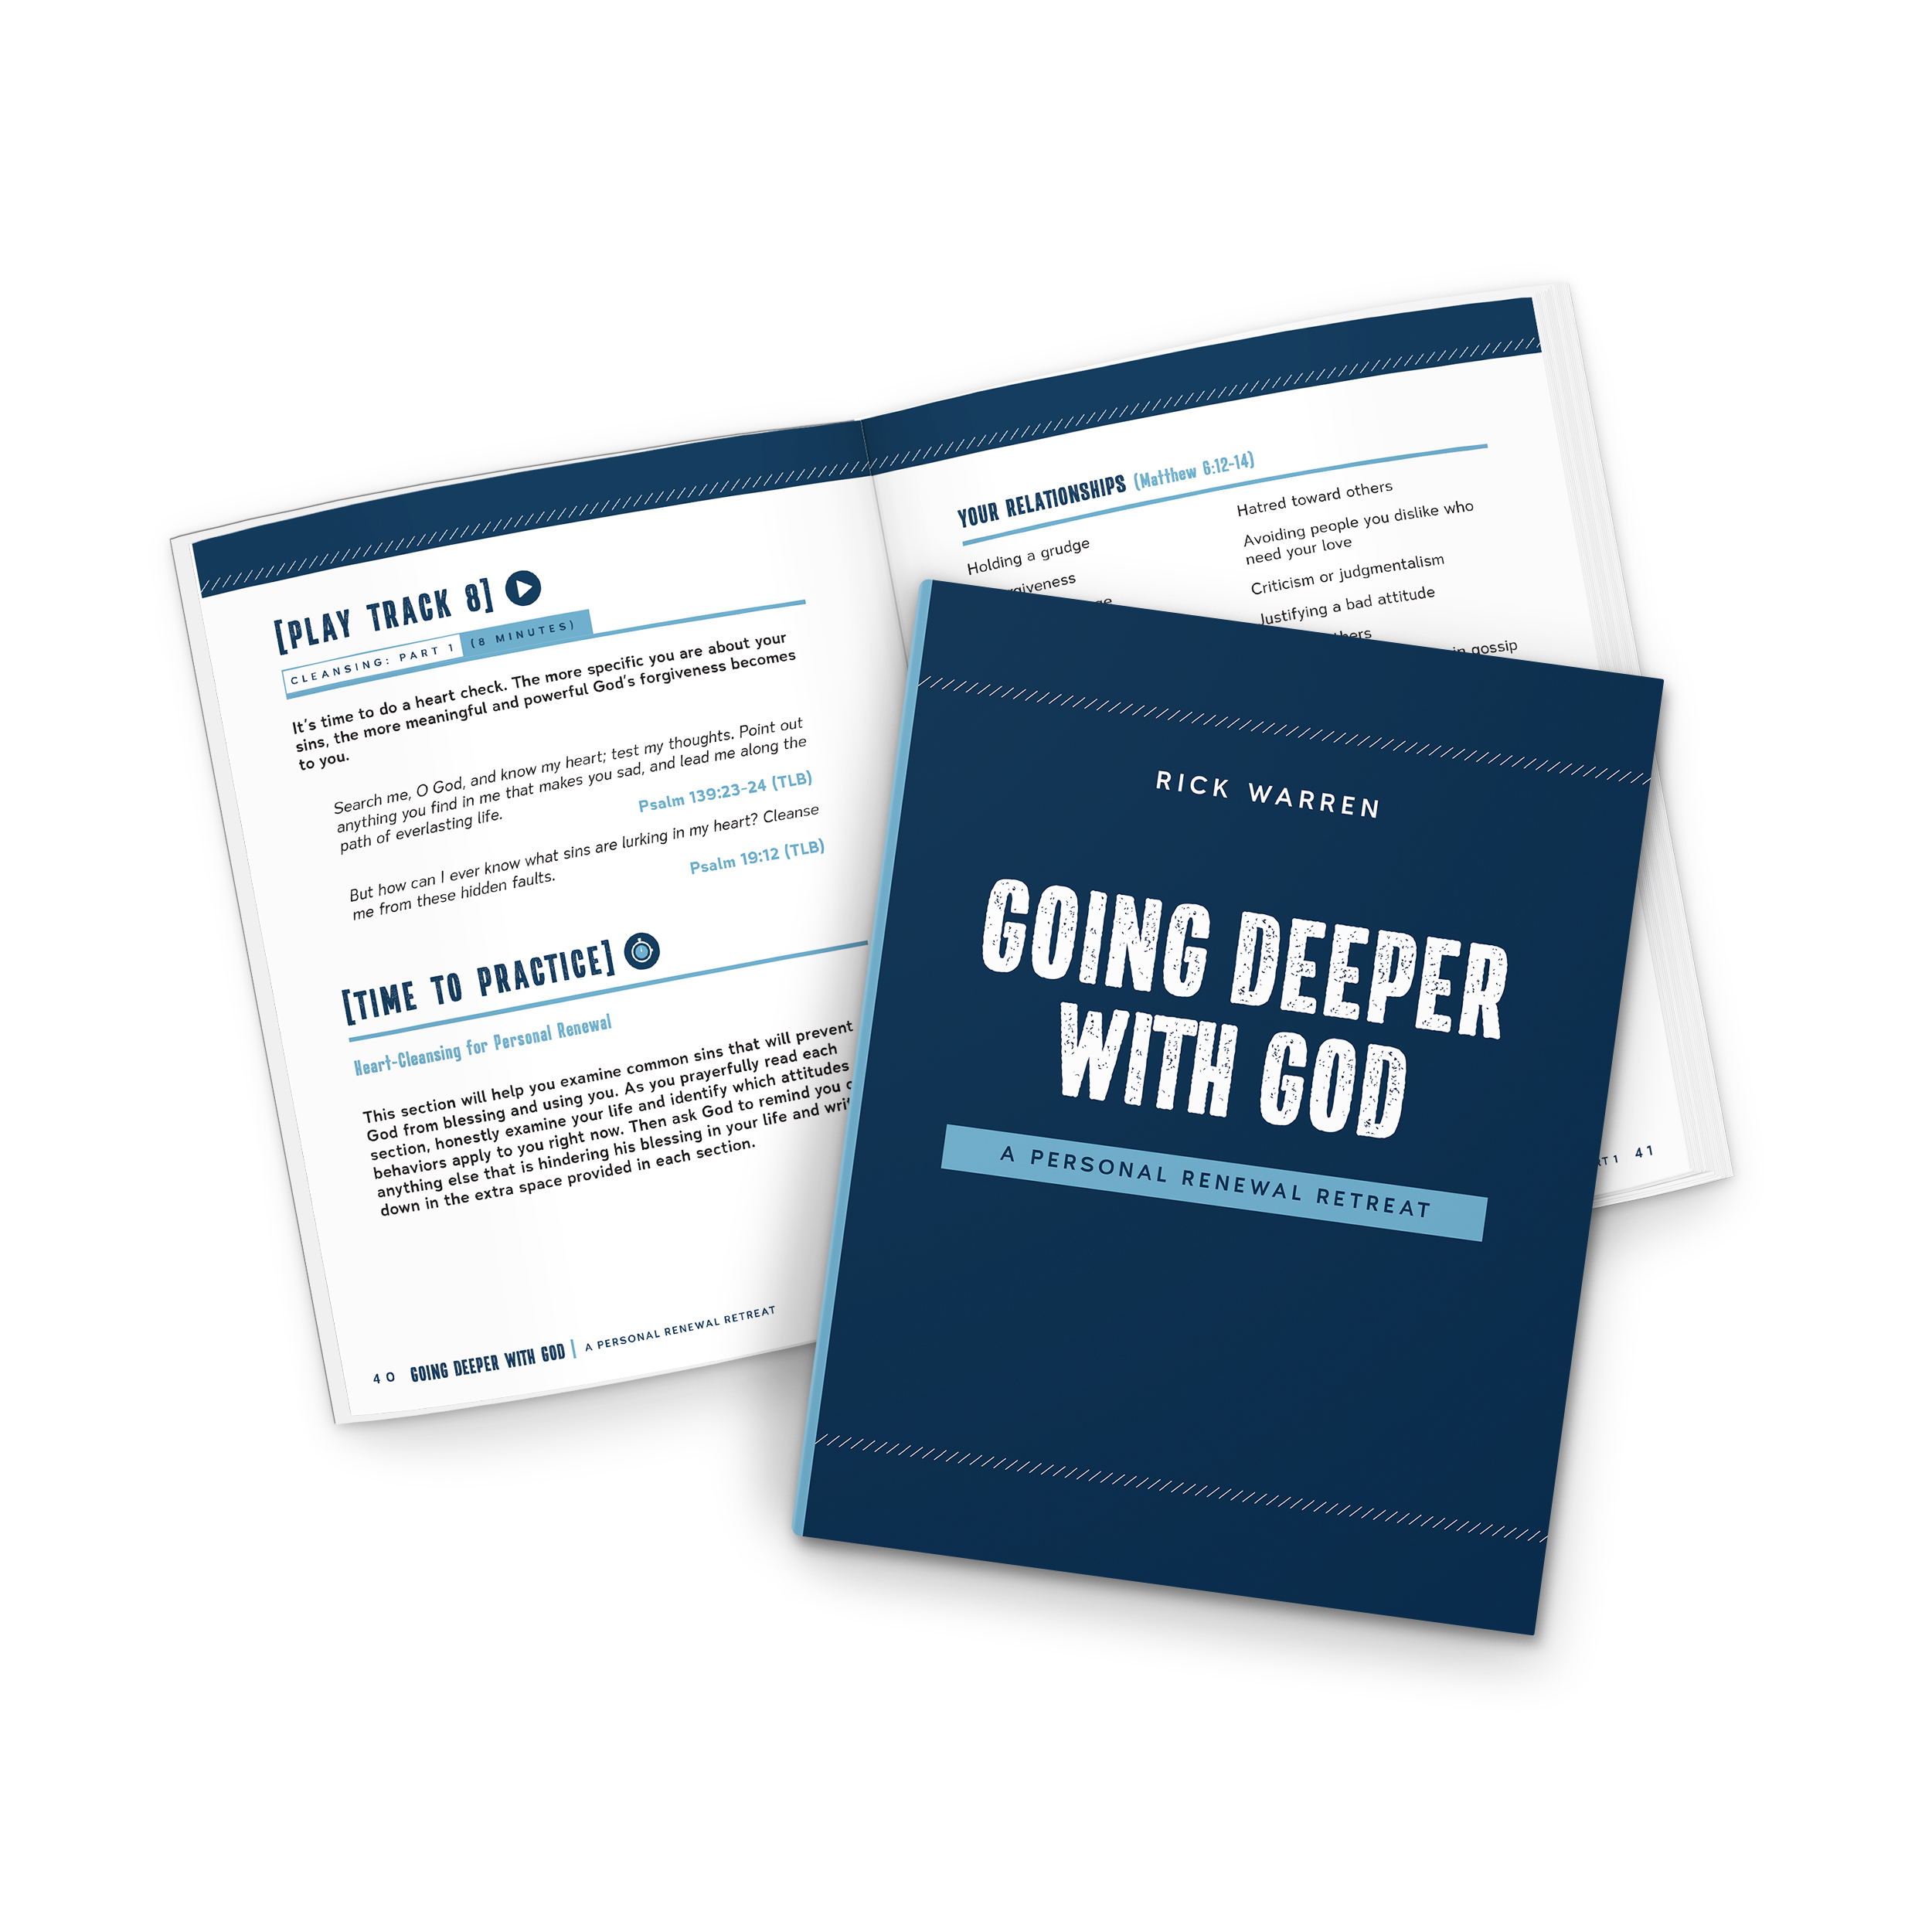 Going Deeper with God: A Personal Renewal Retreat